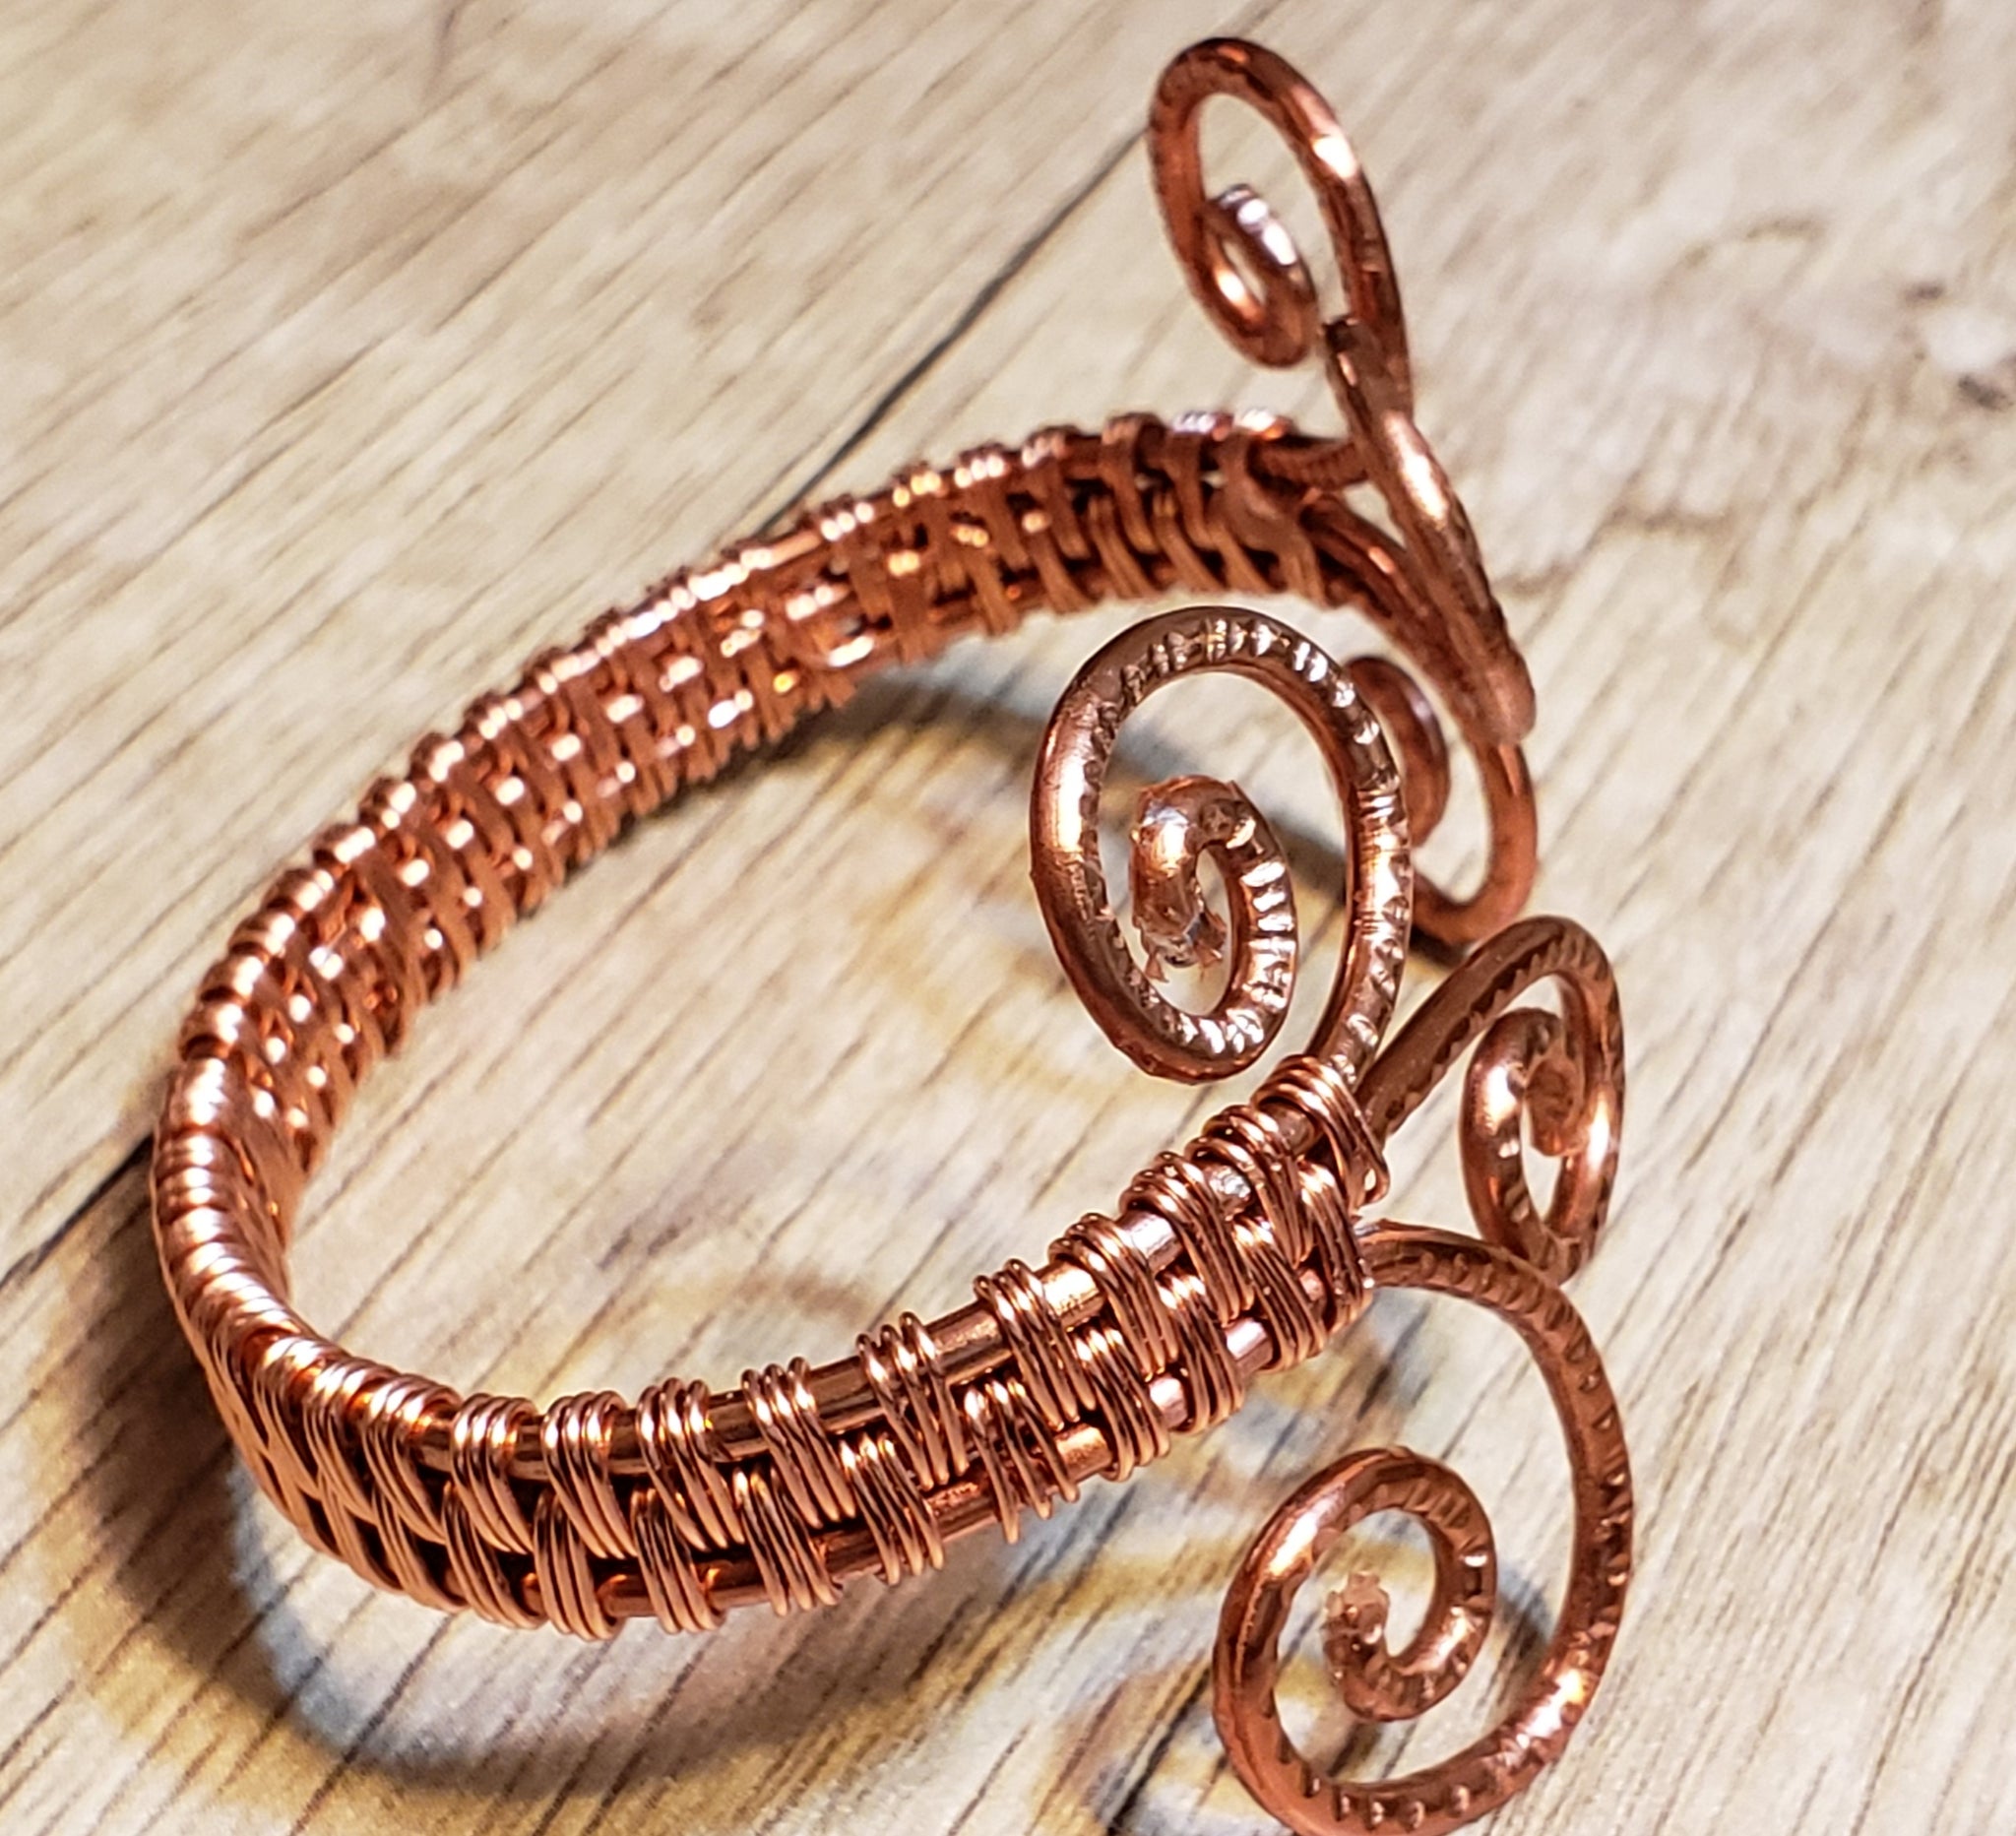 Wire Wrapped Pure Copper Bracelet Unique Stranded Wire Bangle Antique Style Jewelry 7th Anniversary Gift for Him or Her 19.5 cm | WireWrapArt